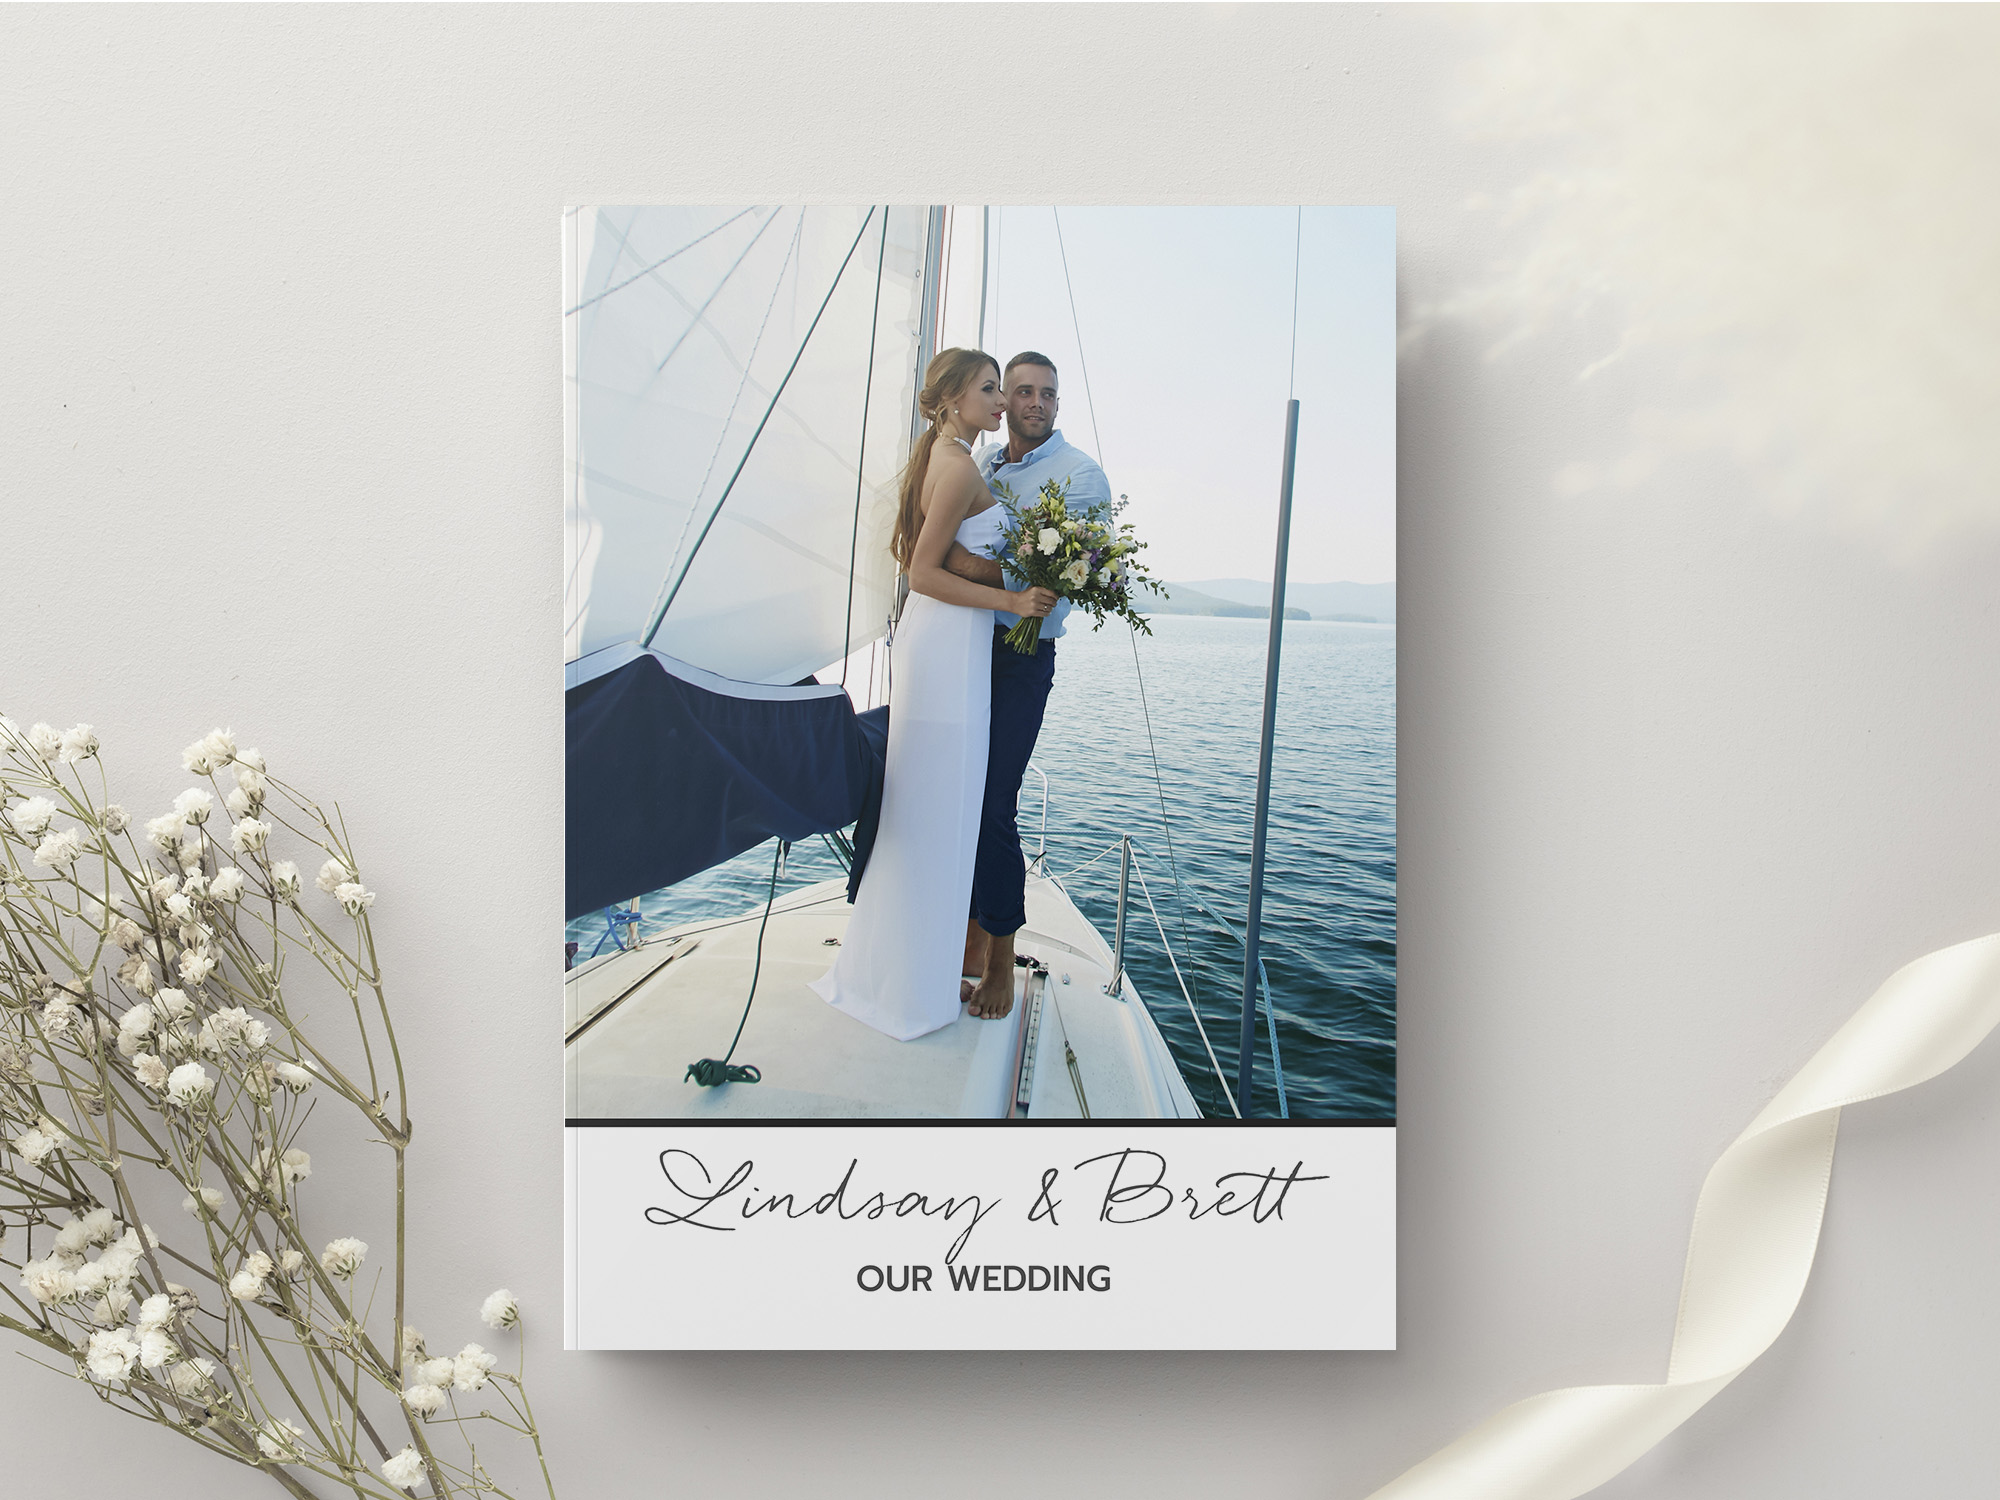 Wedding Photo Book Ideas – A Picture-Perfect “How To” Guide